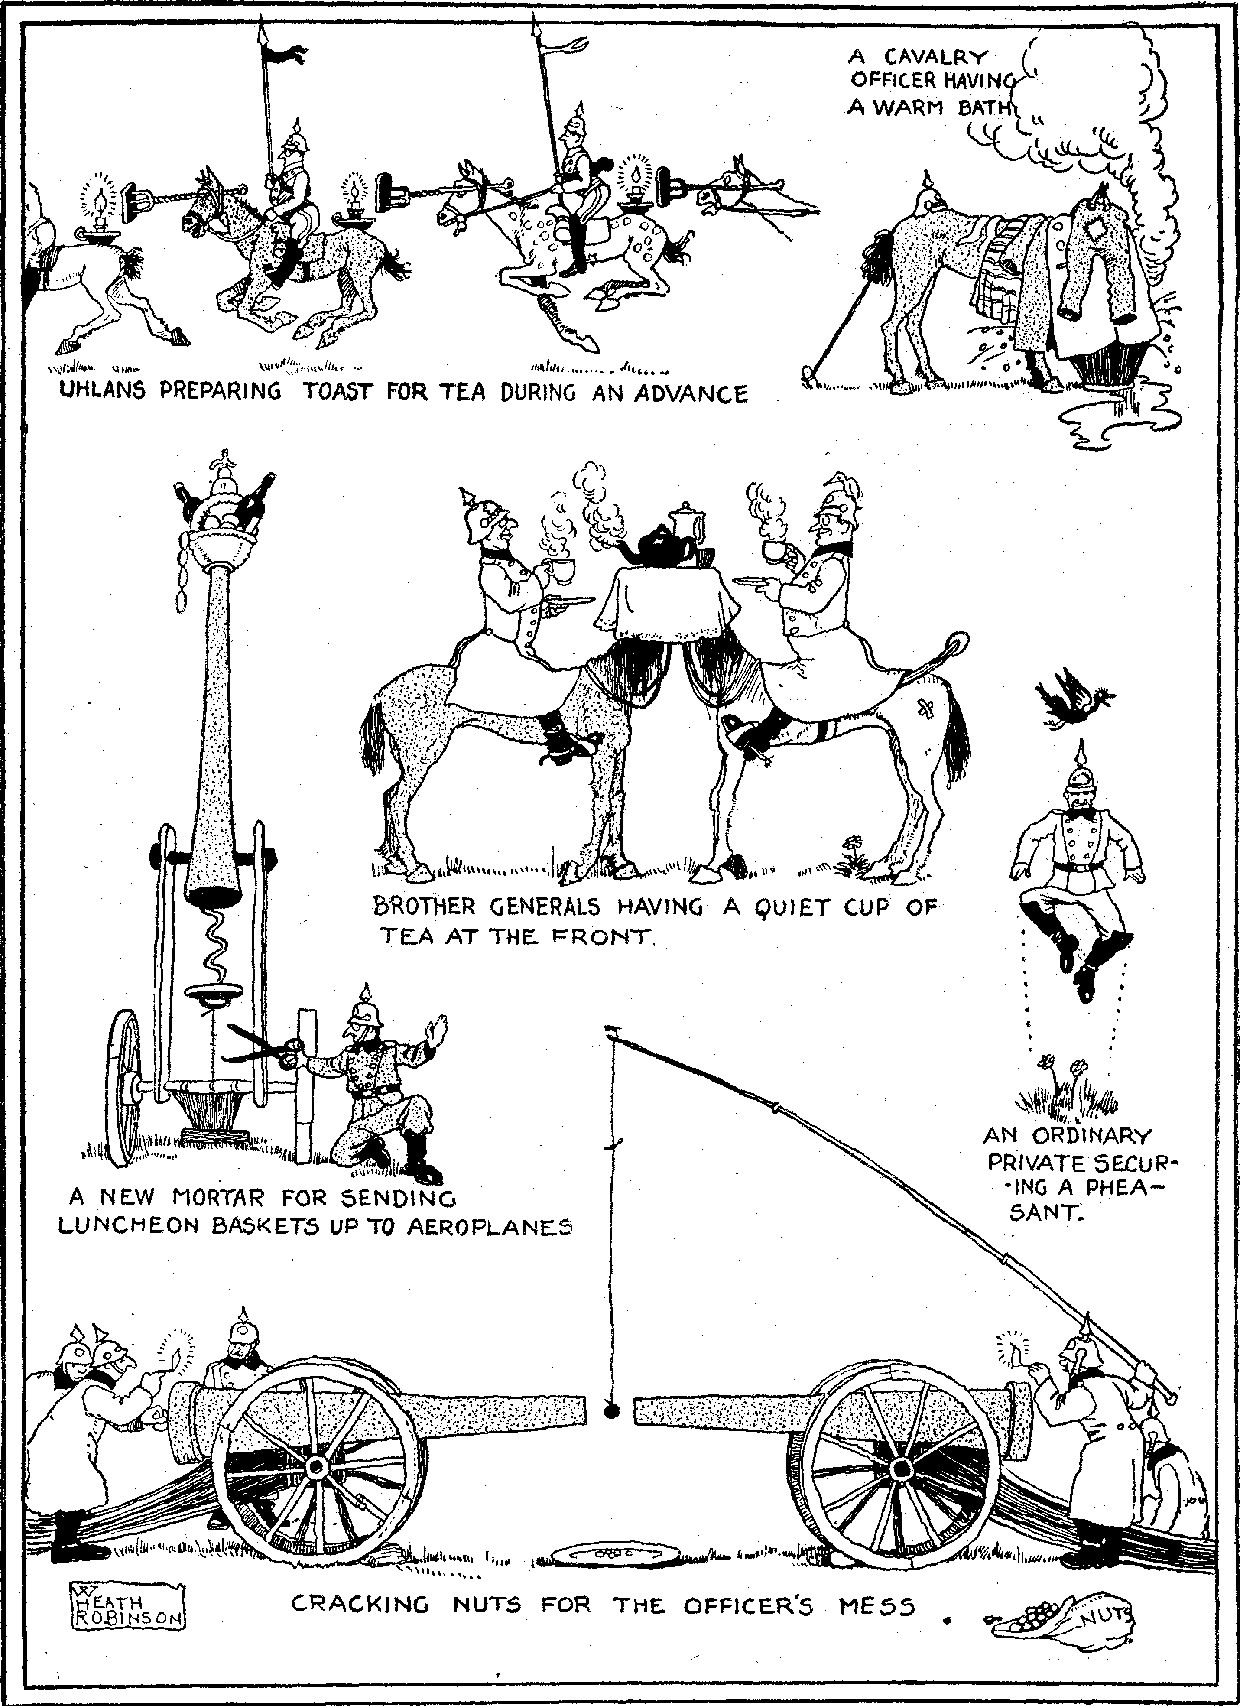 W. Heath Robinson — Project Gutenberg ebook of NY Times Current history, Vol 1 Issue 6